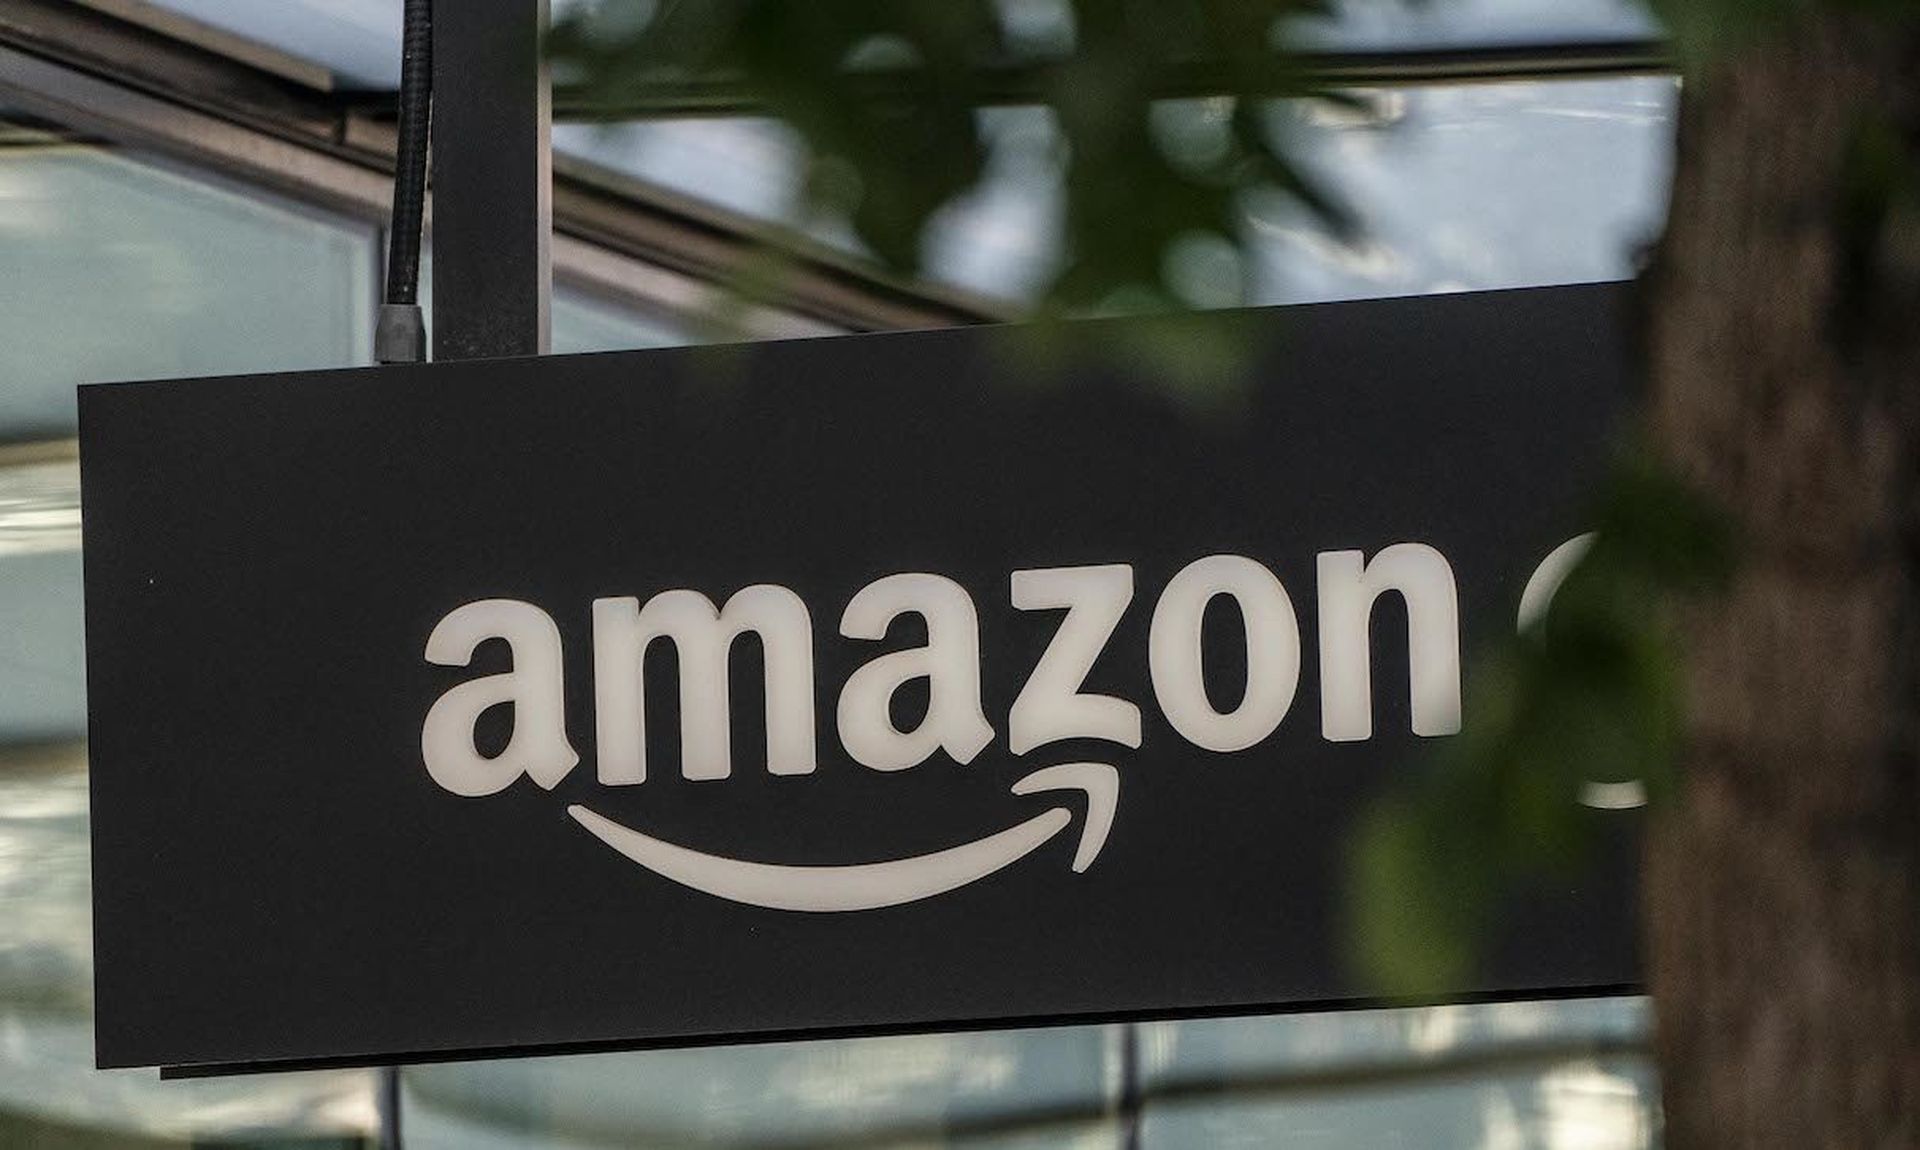 Today’s columnist, Andrey Barashkov of DataArt, says that hackers will continue to impersonate popular brands such as Amazon, but continued vigilance and employee education can help companies mitigate many of these attacks. (Photo by David Ryder/Getty Images)